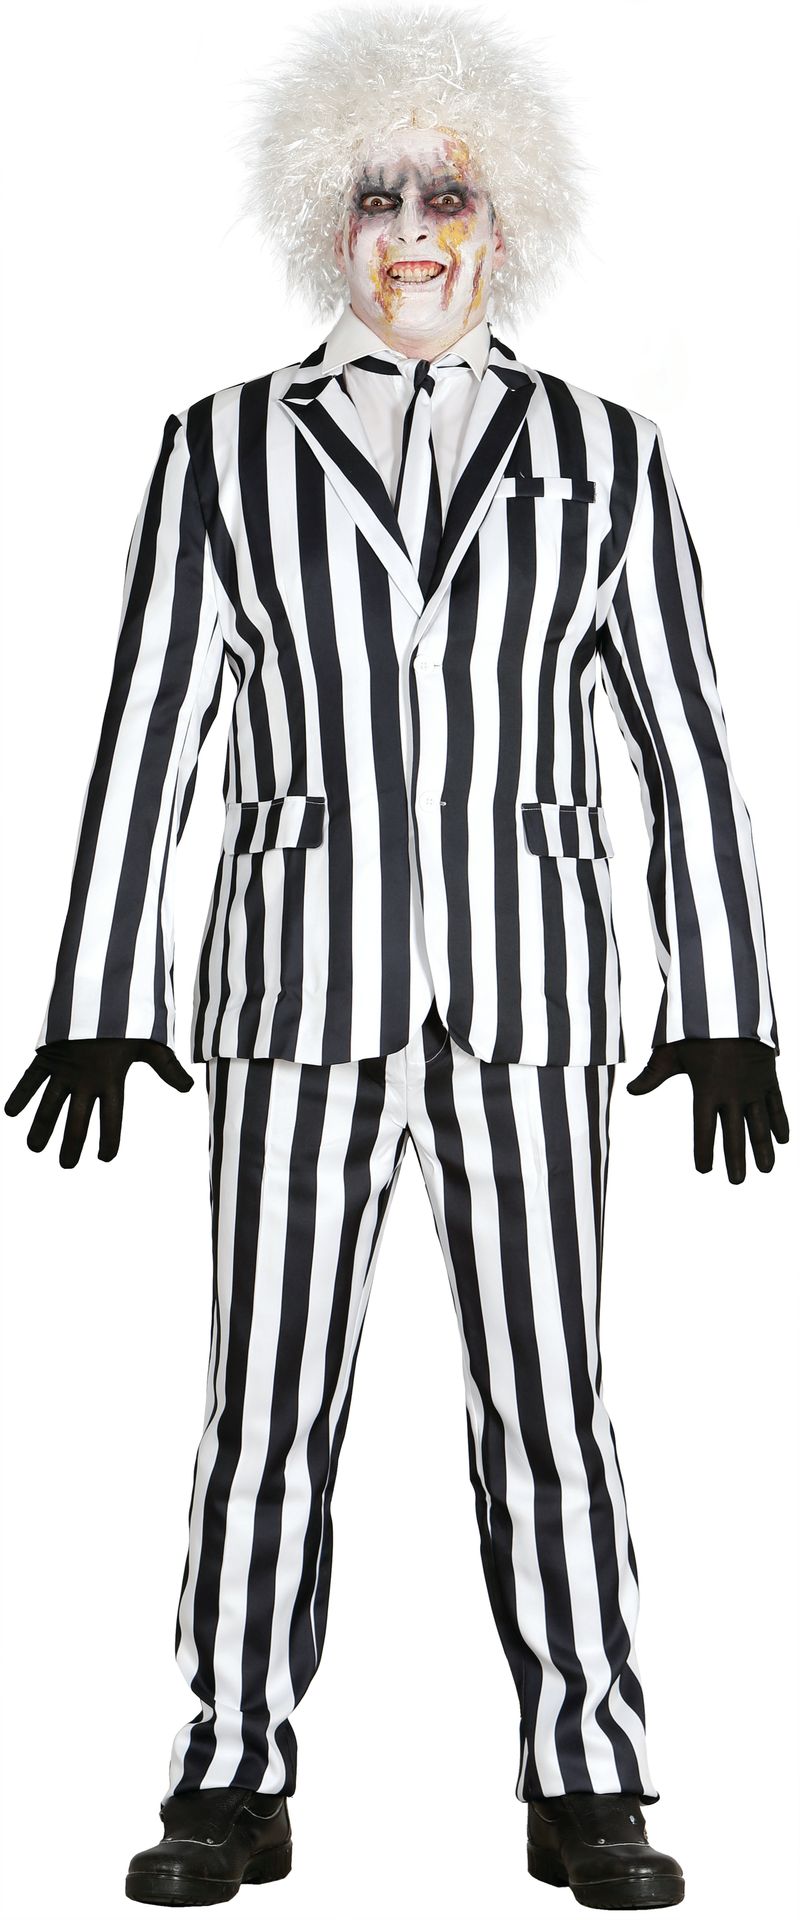 Beetlejuice outfit